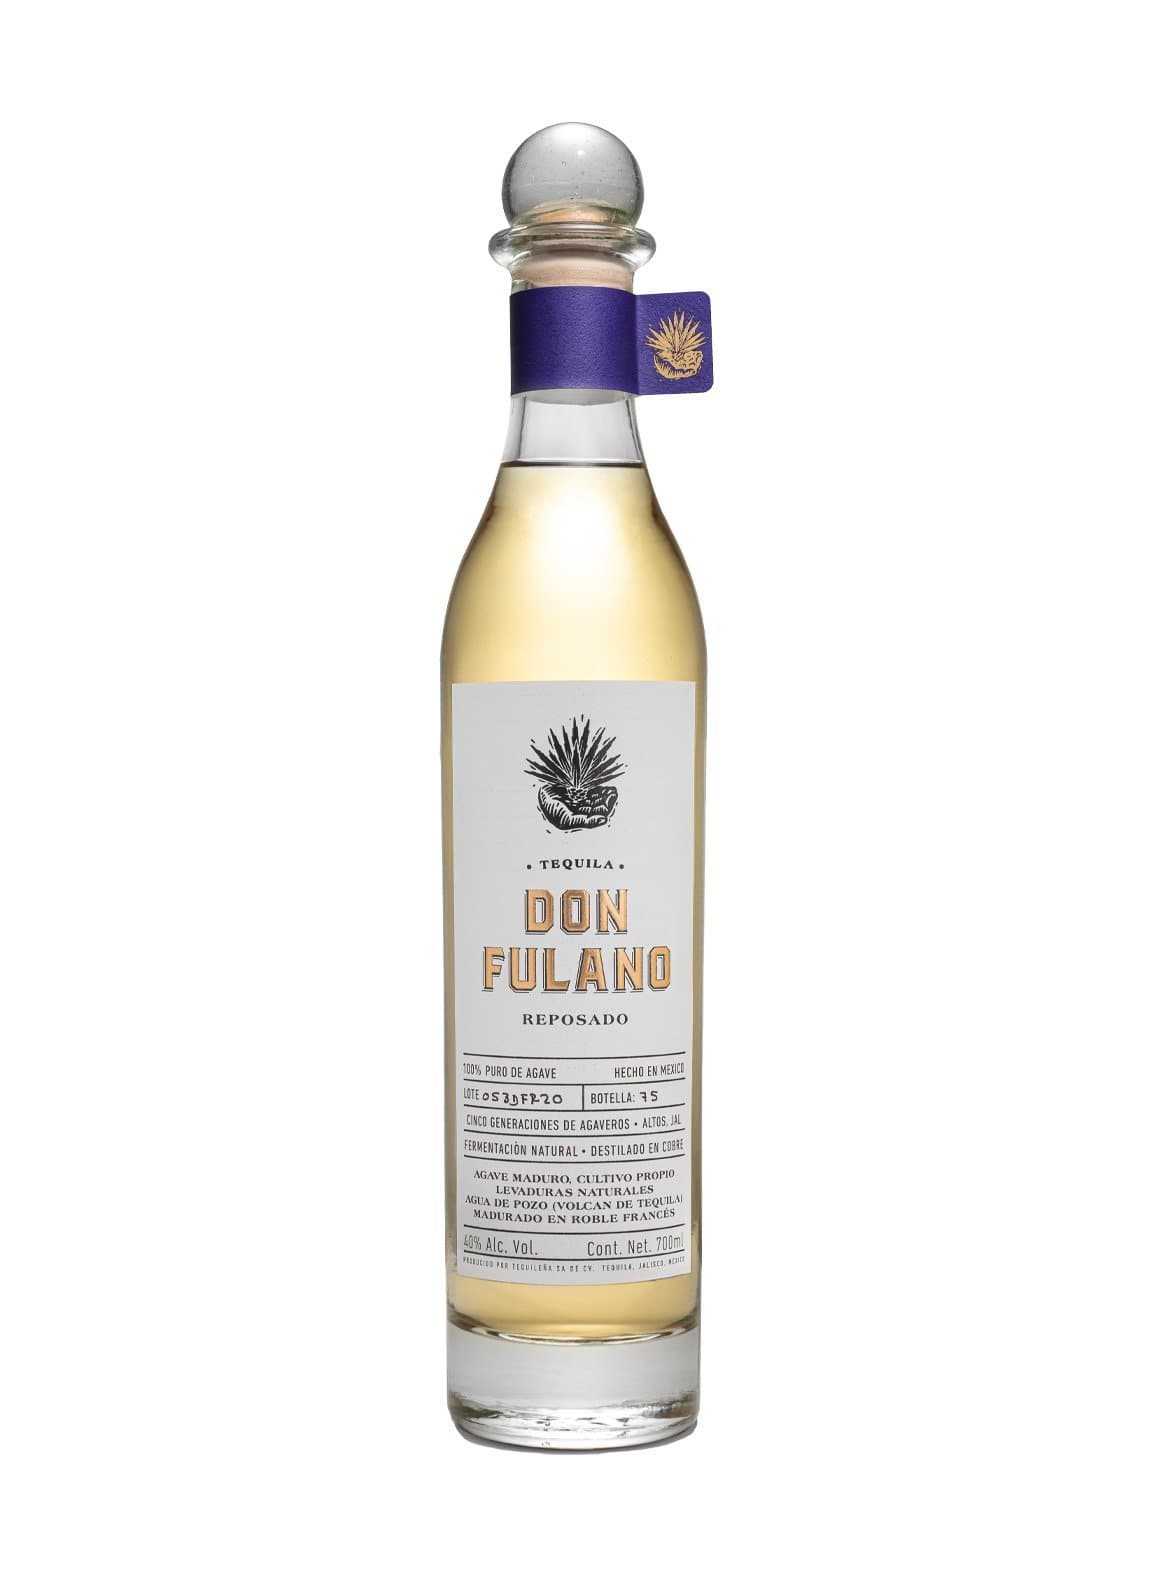 Don Fulano Reposado Tequila 40% 700ml | Tequila | Shop online at Spirits of France